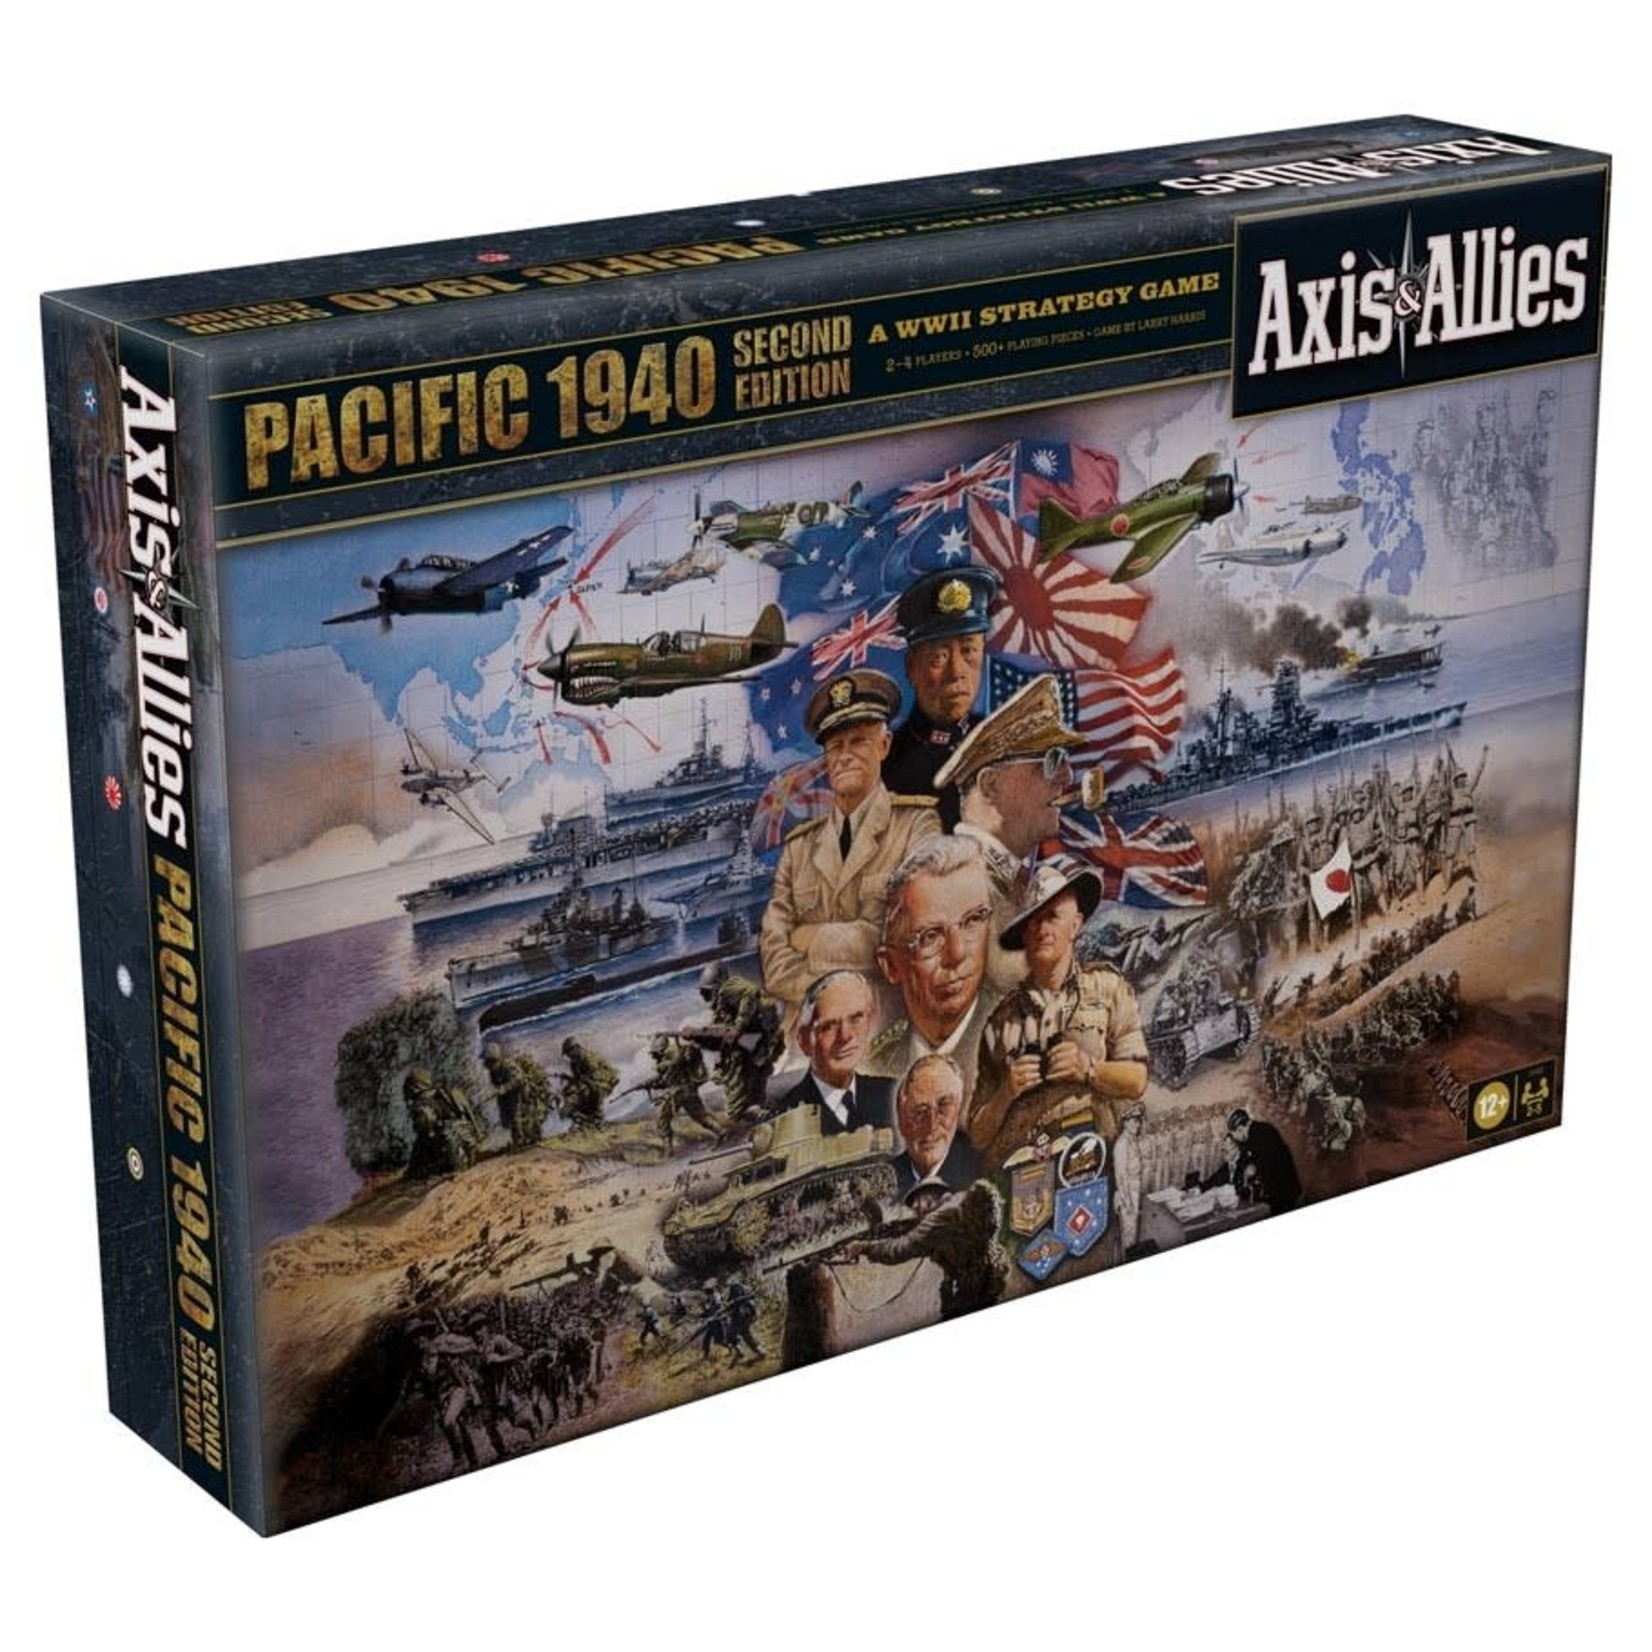 Hasbro Axis & Allies: Pacific 1940 2nd Edition